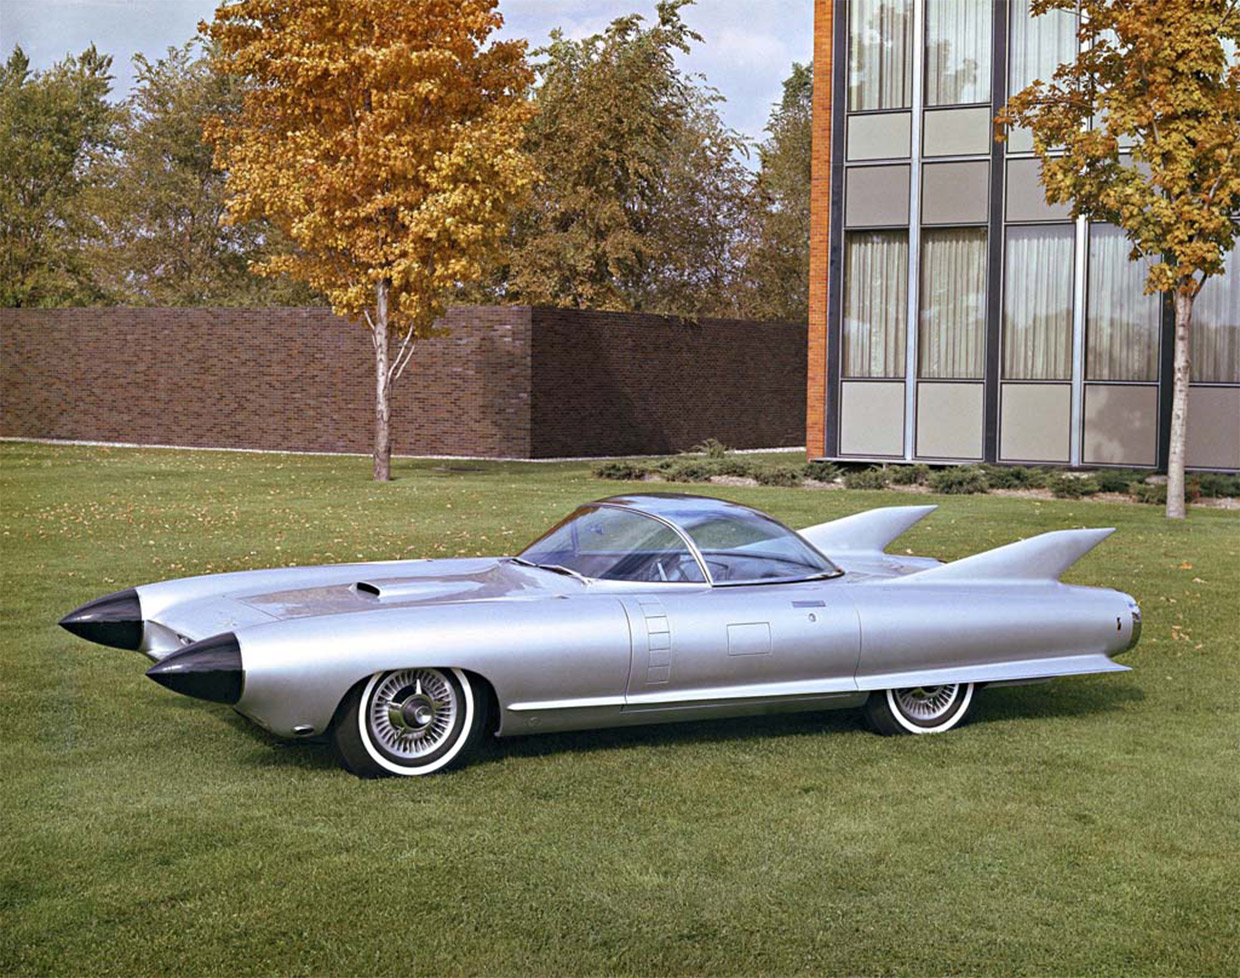 Concepts from Future Past: Cadillac Cyclone